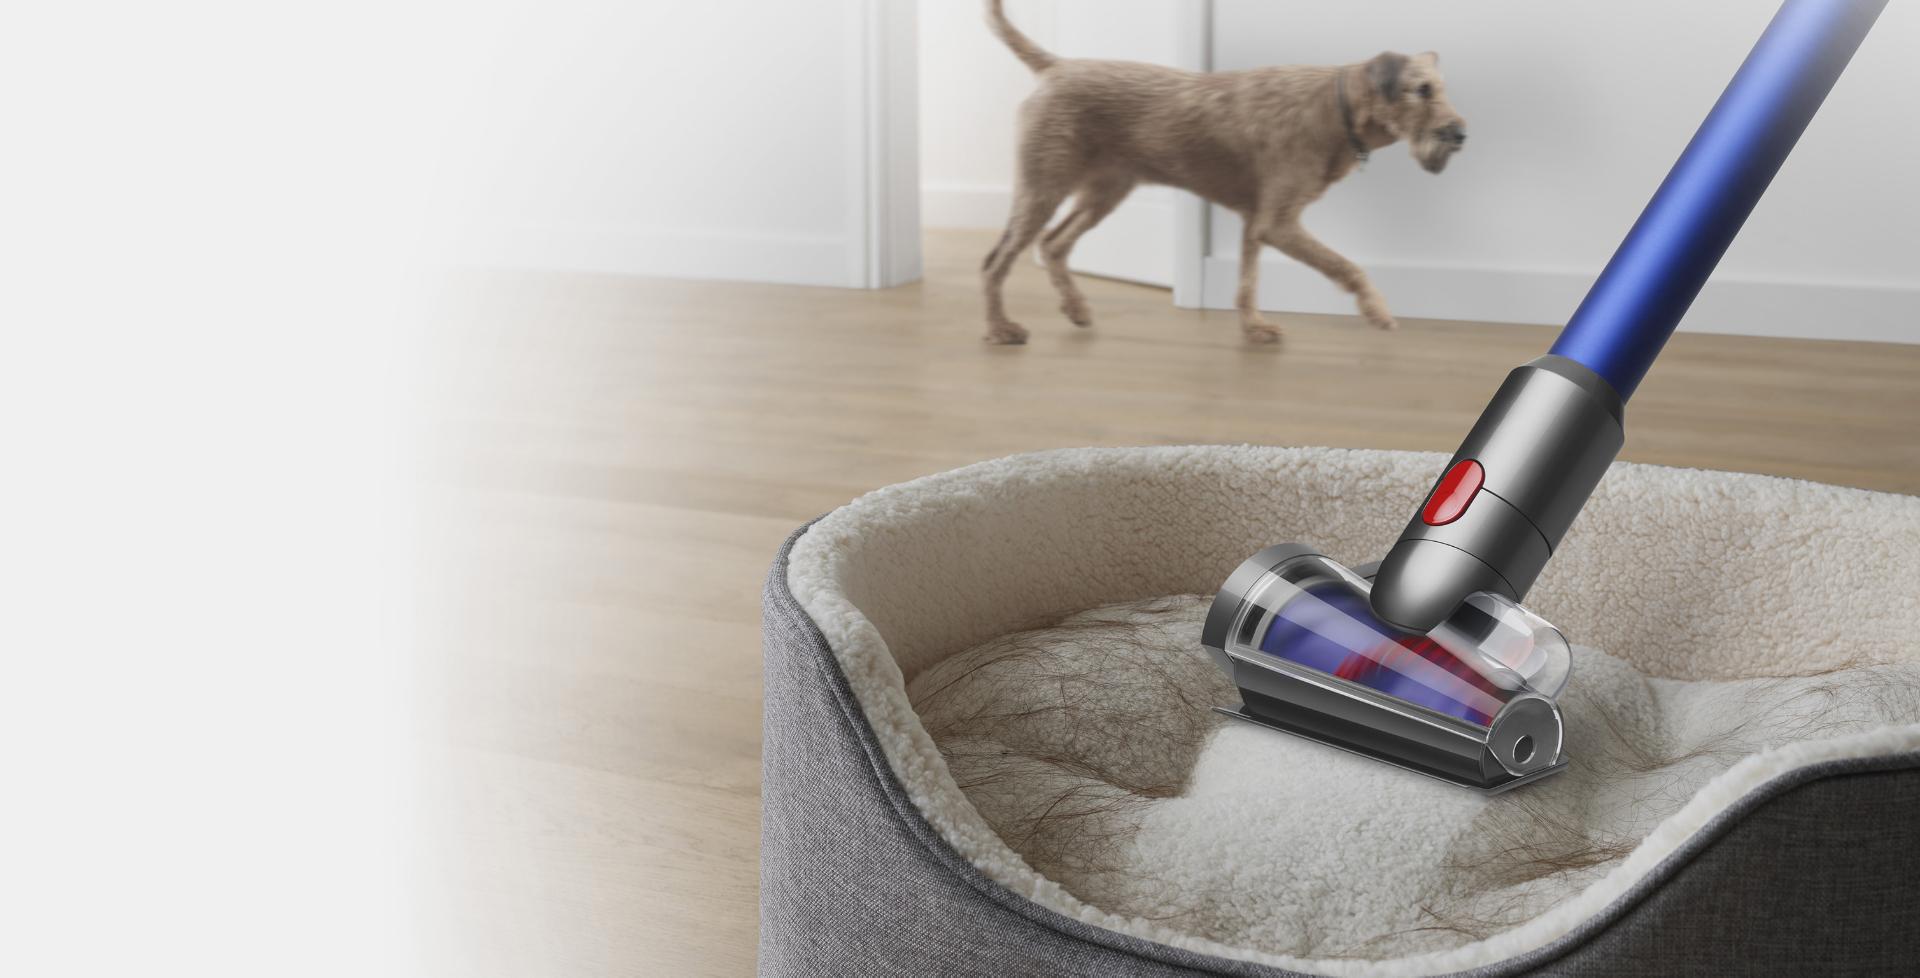 Dyson Hair screw tool cleaning a pet bed